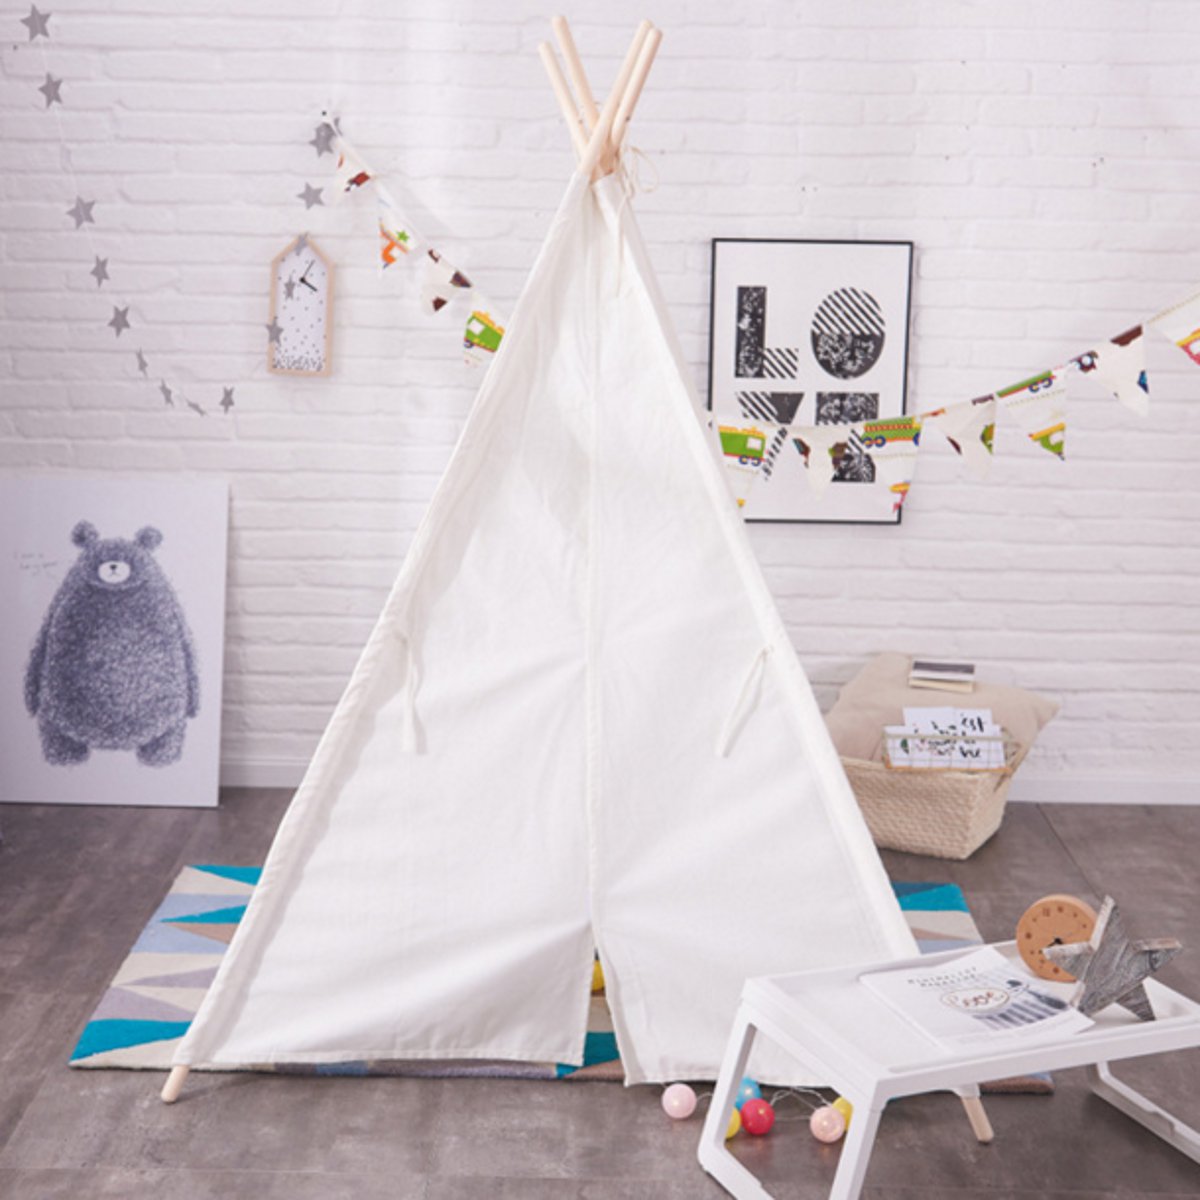 120x120x150cm-White-Canvas-Kids-Teepee-Children-Home-Game-Toy-Play-Tent-Cubby-1352995